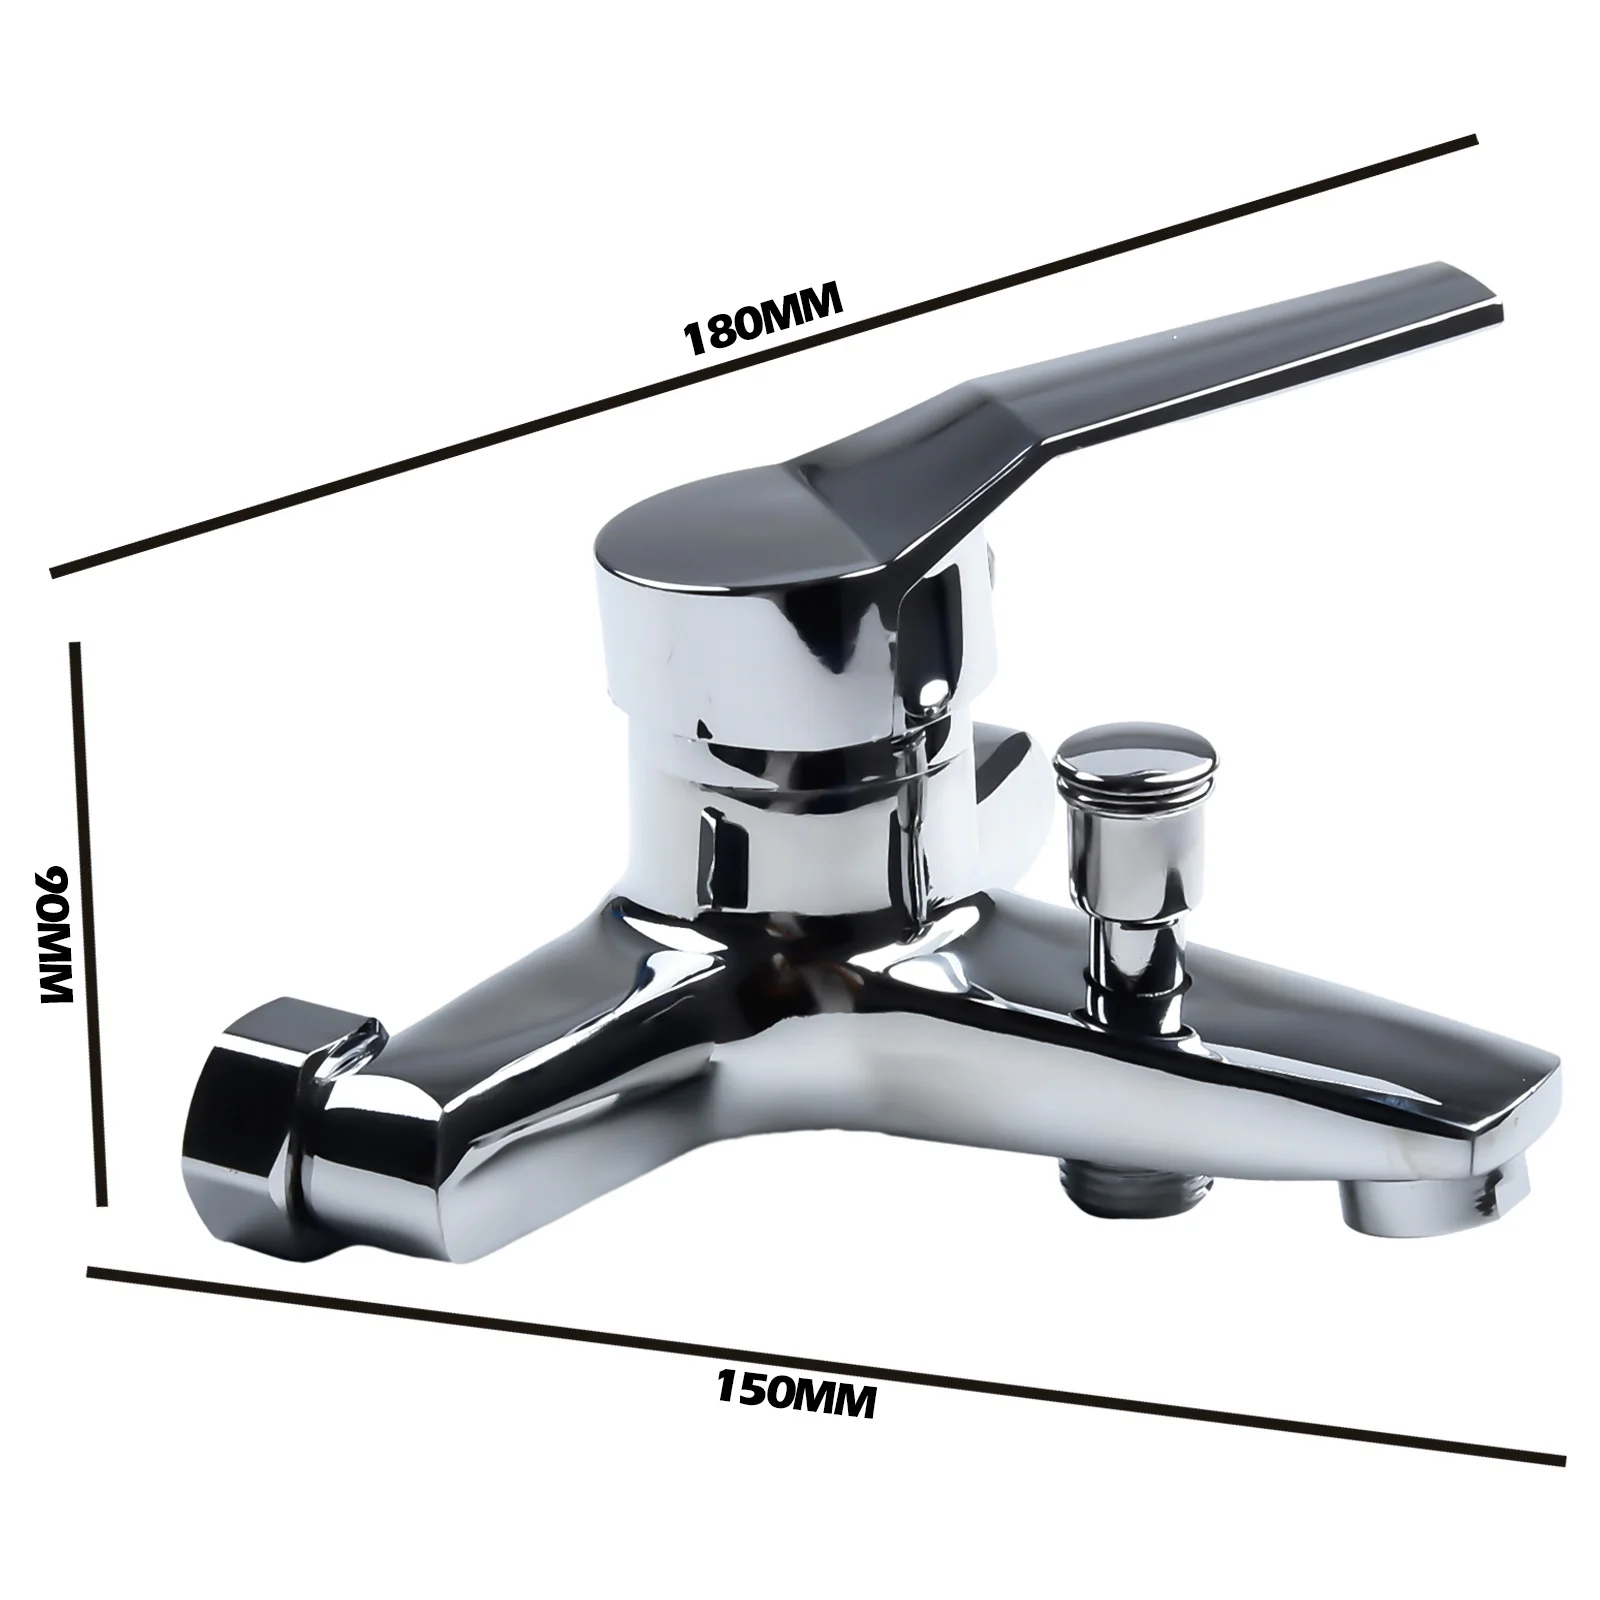 

Single Handle Faucet Wall Mounted Made from Durable Zinc Alloy For Hot and Cold Water Simple Modern Design Suitable for Any Home